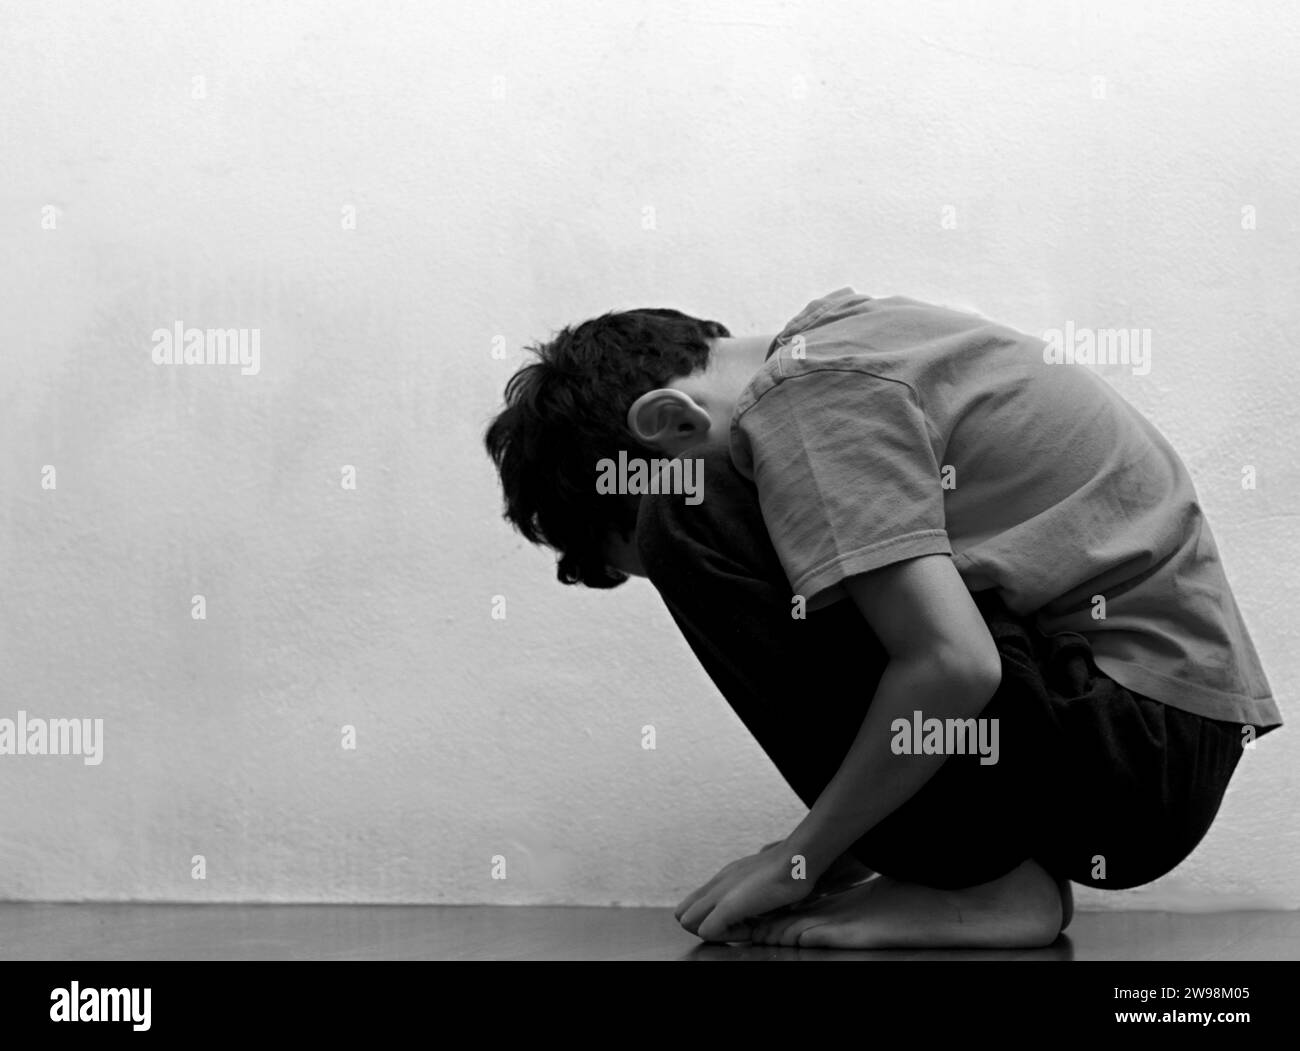 boy praying in poverty on the floor stock image with no help crying alone and all by himself on white background stock photo Stock Photo